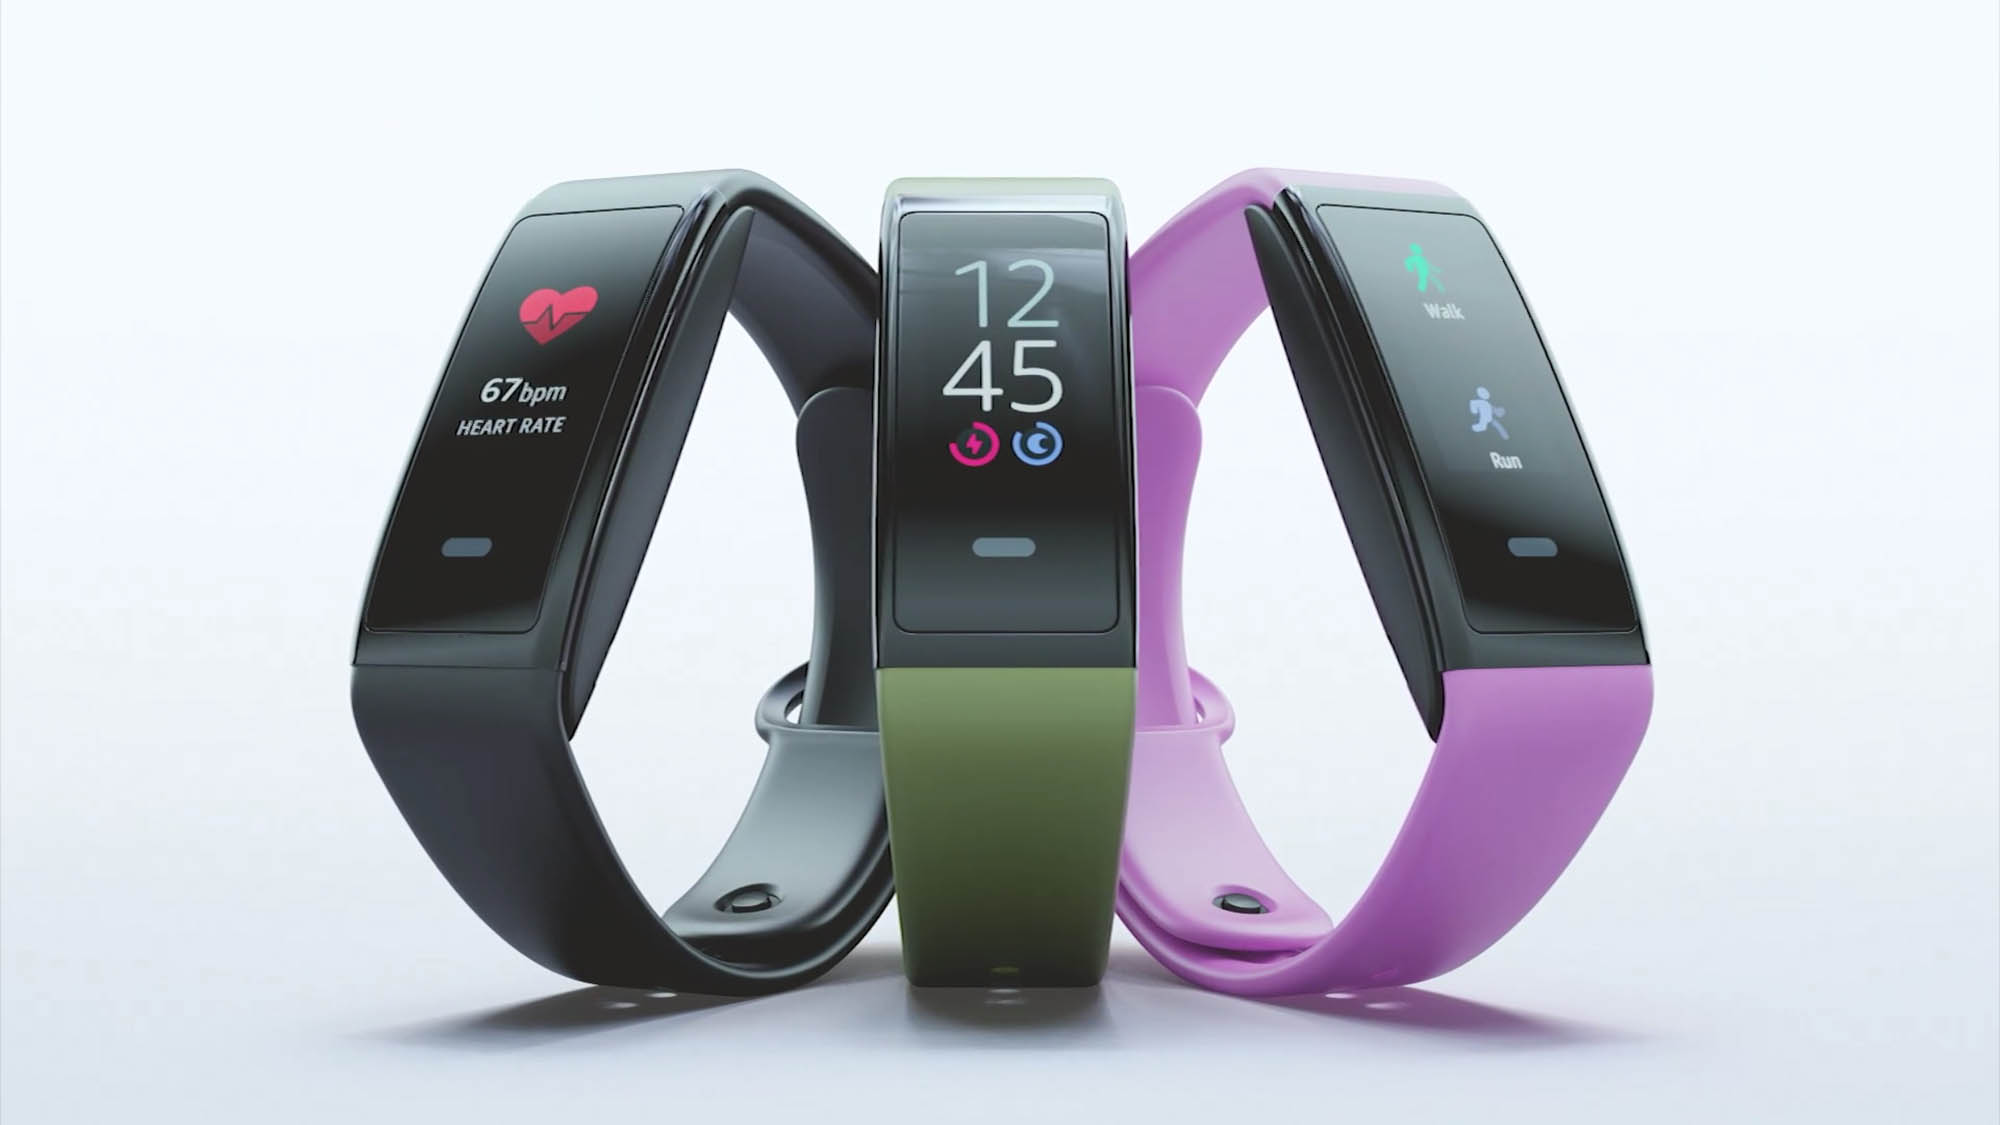 Halo View Review: An Affordable Fitbit Alternative | Digital Trends